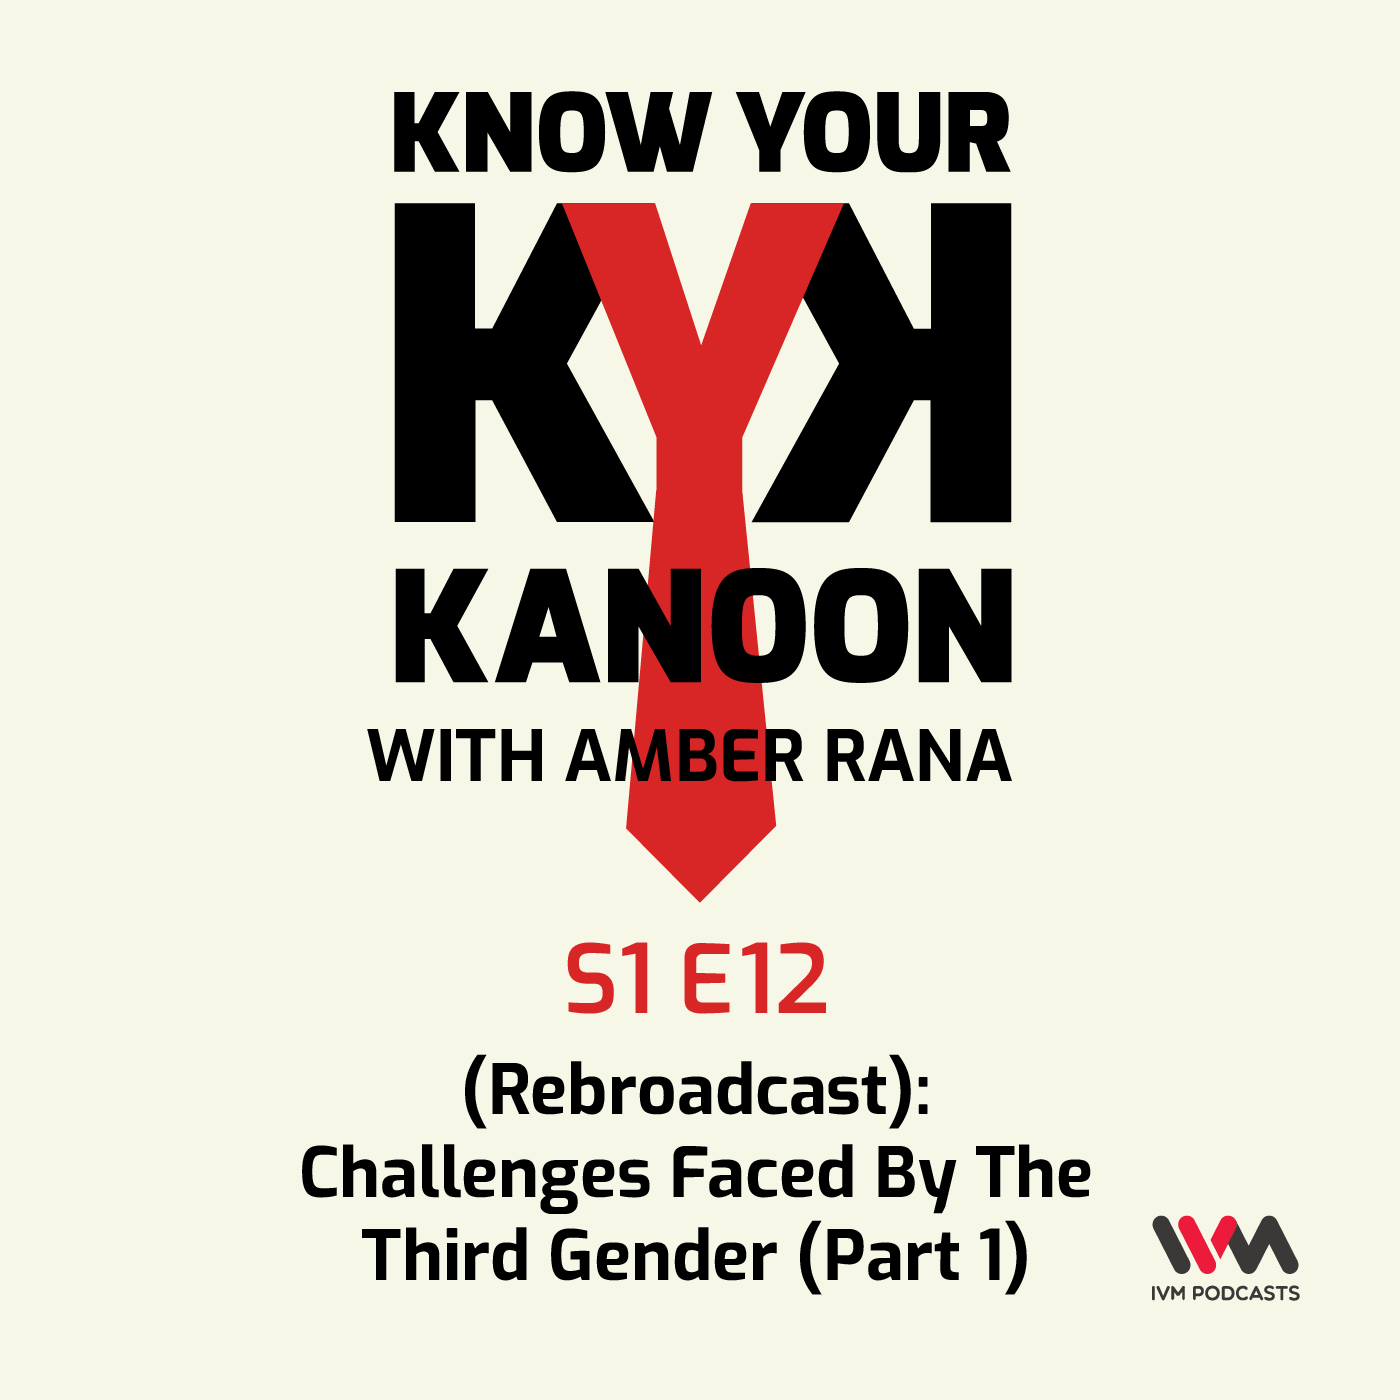 S01 E12 (Rebroadcast): Challenges Faced By The Third Gender (Part 1)